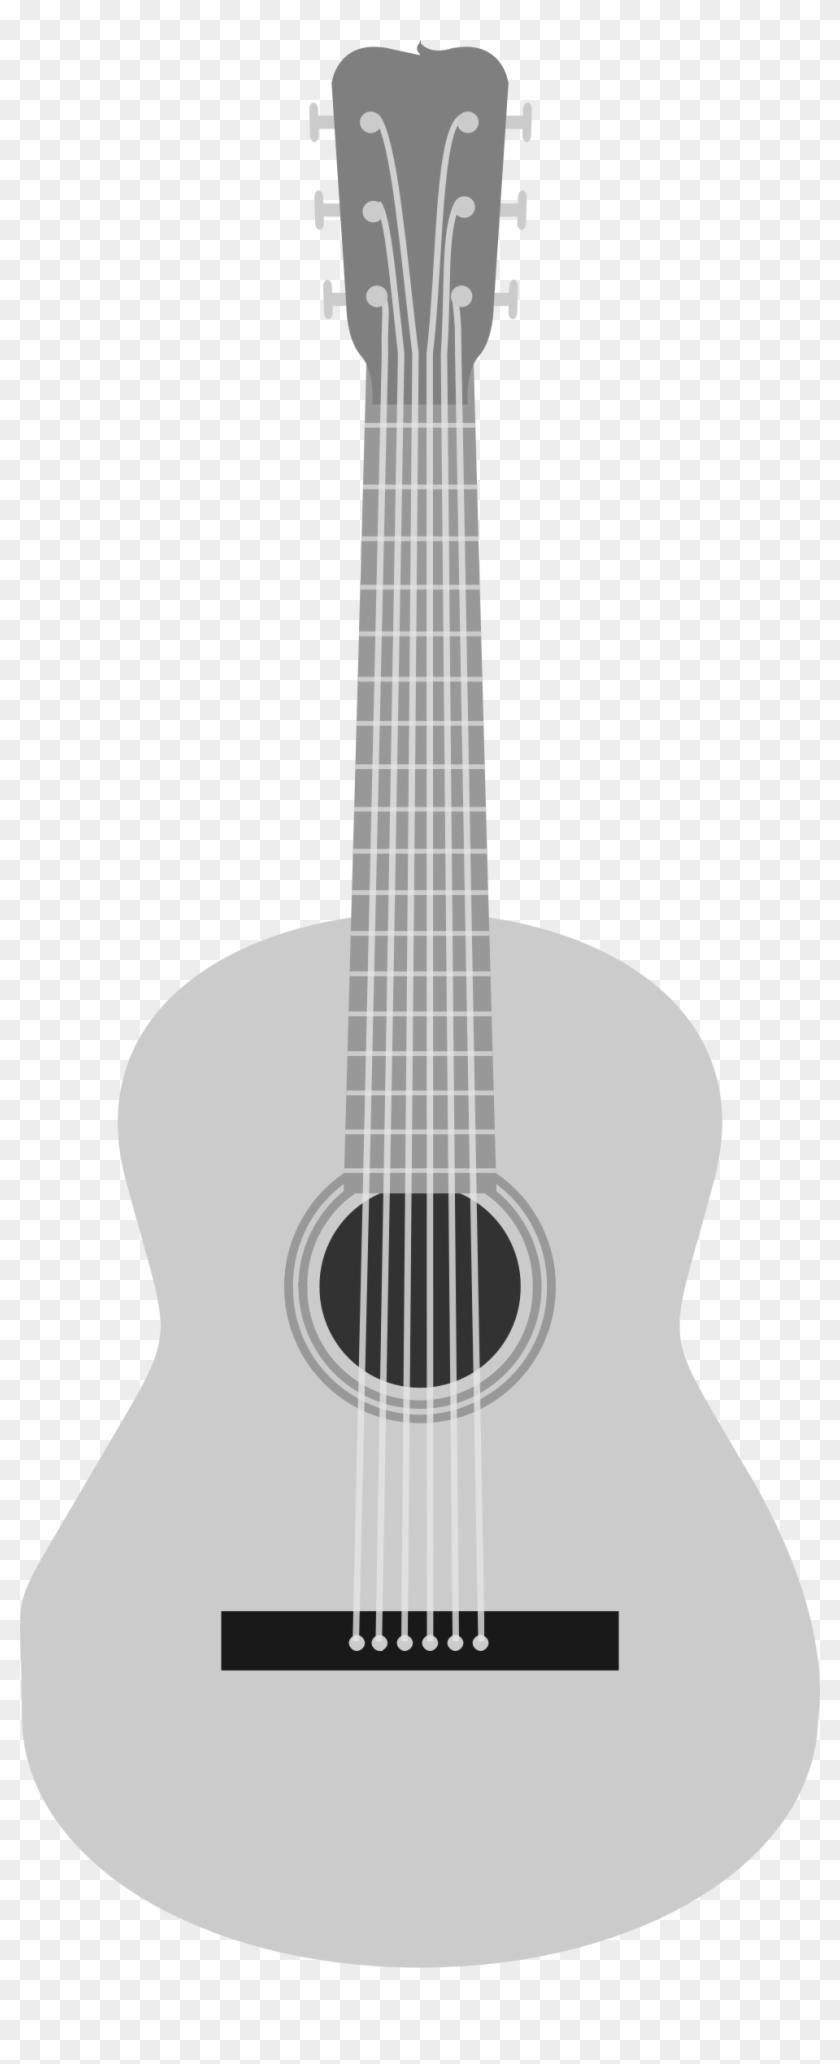 This Free Icons Png Design Of Grayscale Acoustic Guitar - White Acoustic Guitar Png Clipart #18515